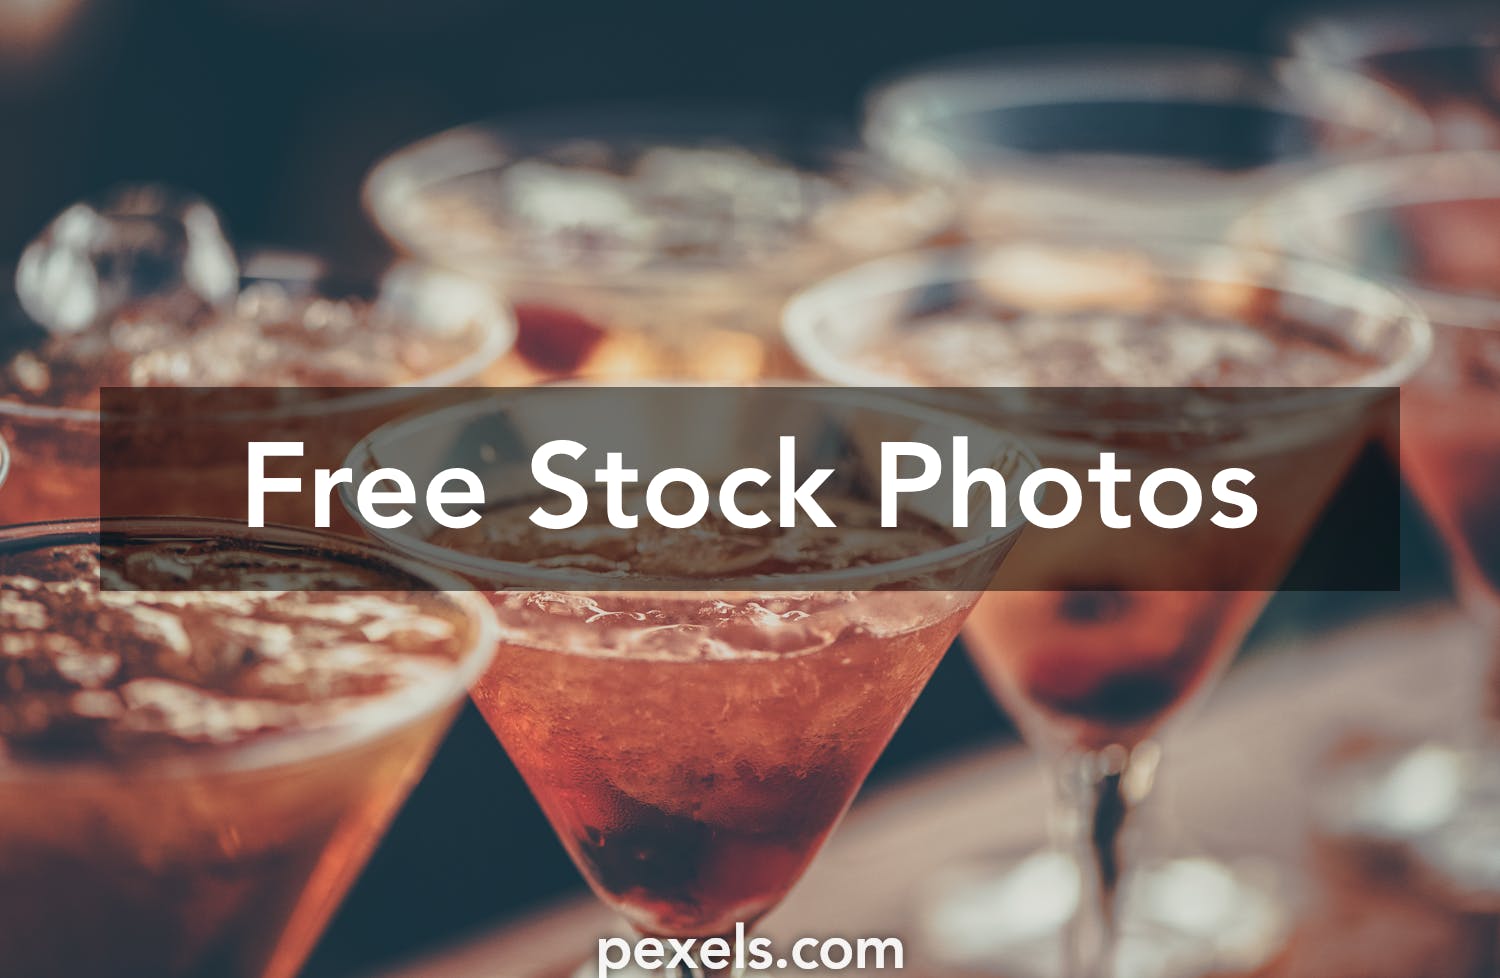 000 Best Cocktail Party Photos 100 Free Download Pexels Stock Photos